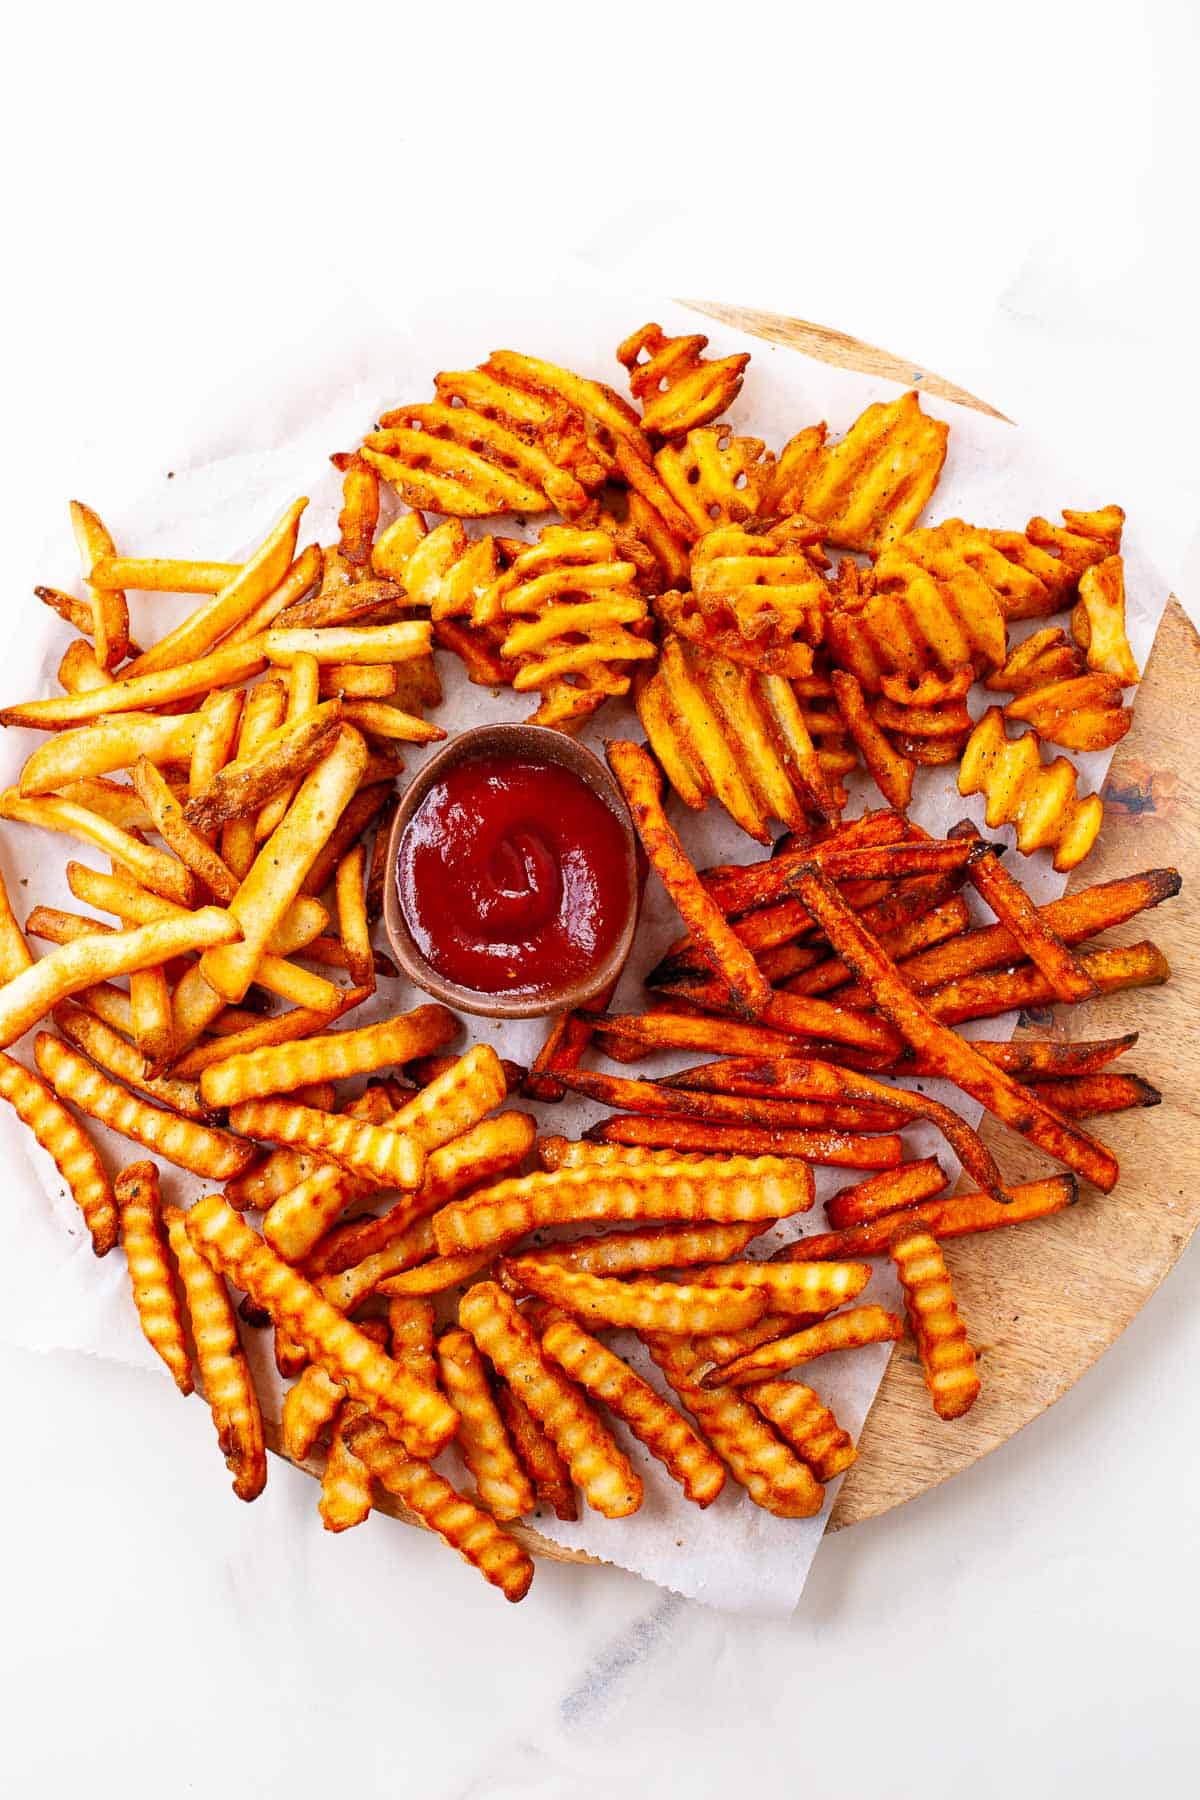 crispy crinkle, waffle, sweet potato, regular fries on circular wooden plate. white napkin underneath. small wooden bowl with ketchup. on white marble counter.